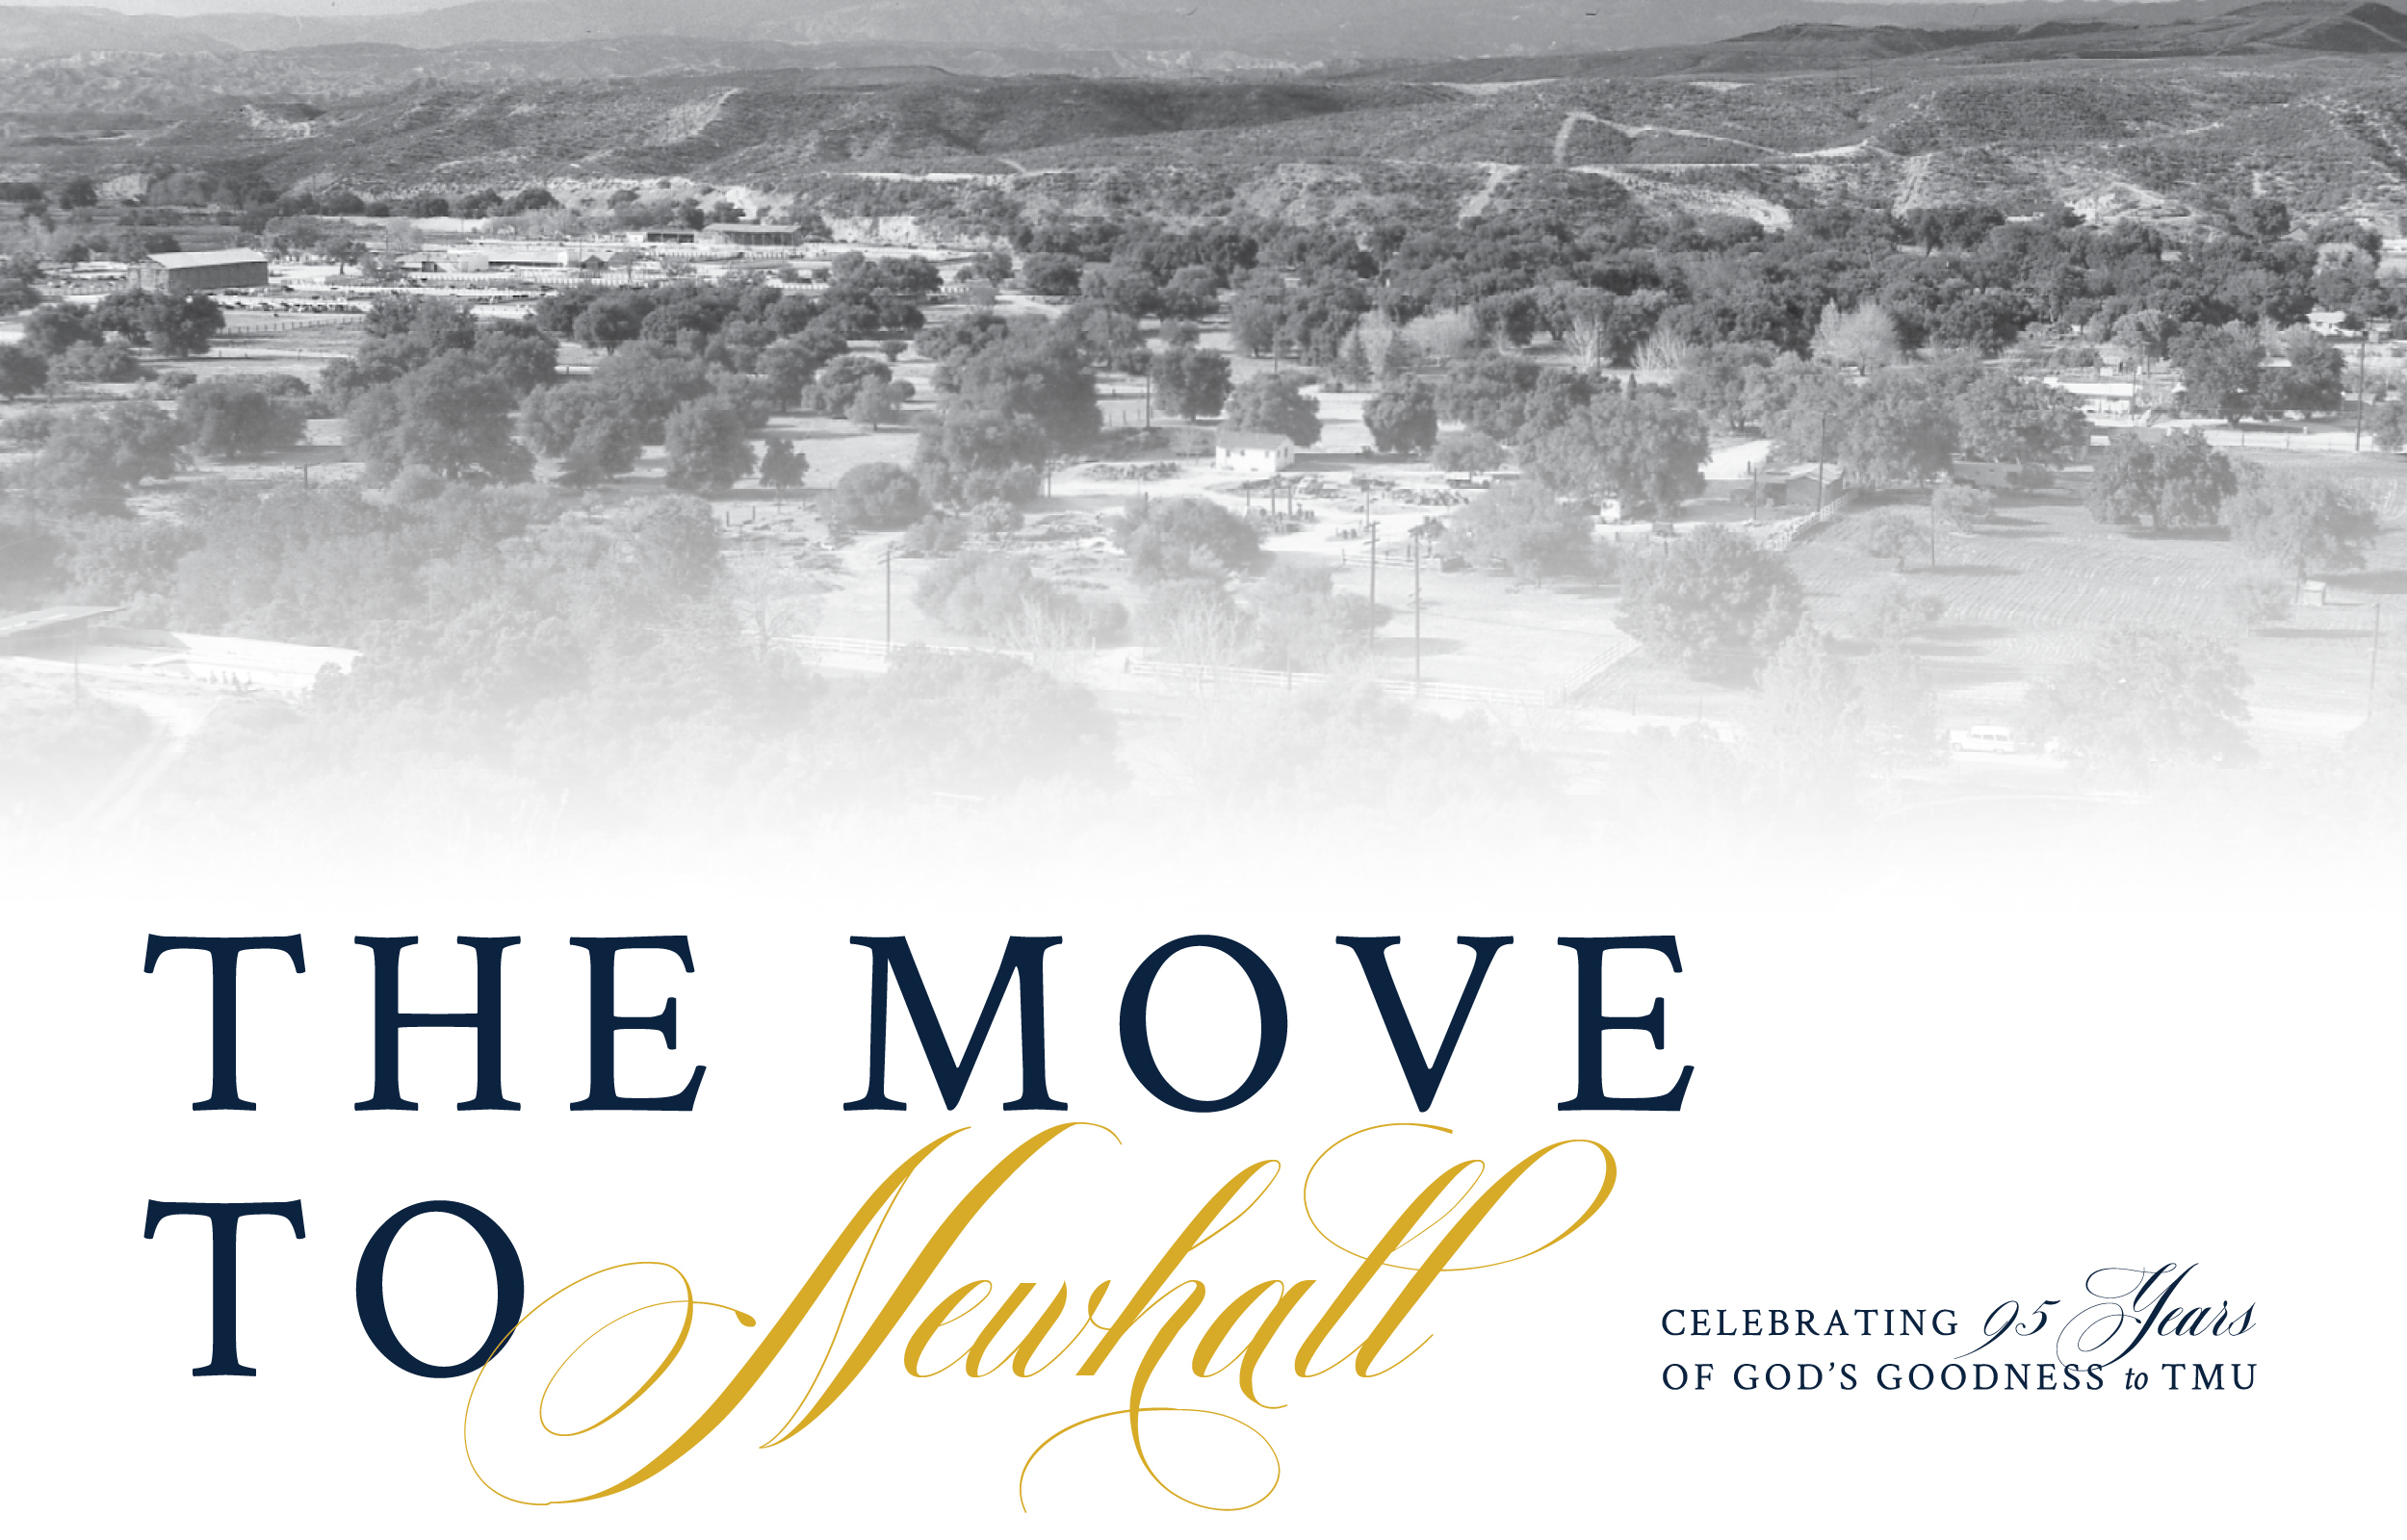 The Move to Newhall image